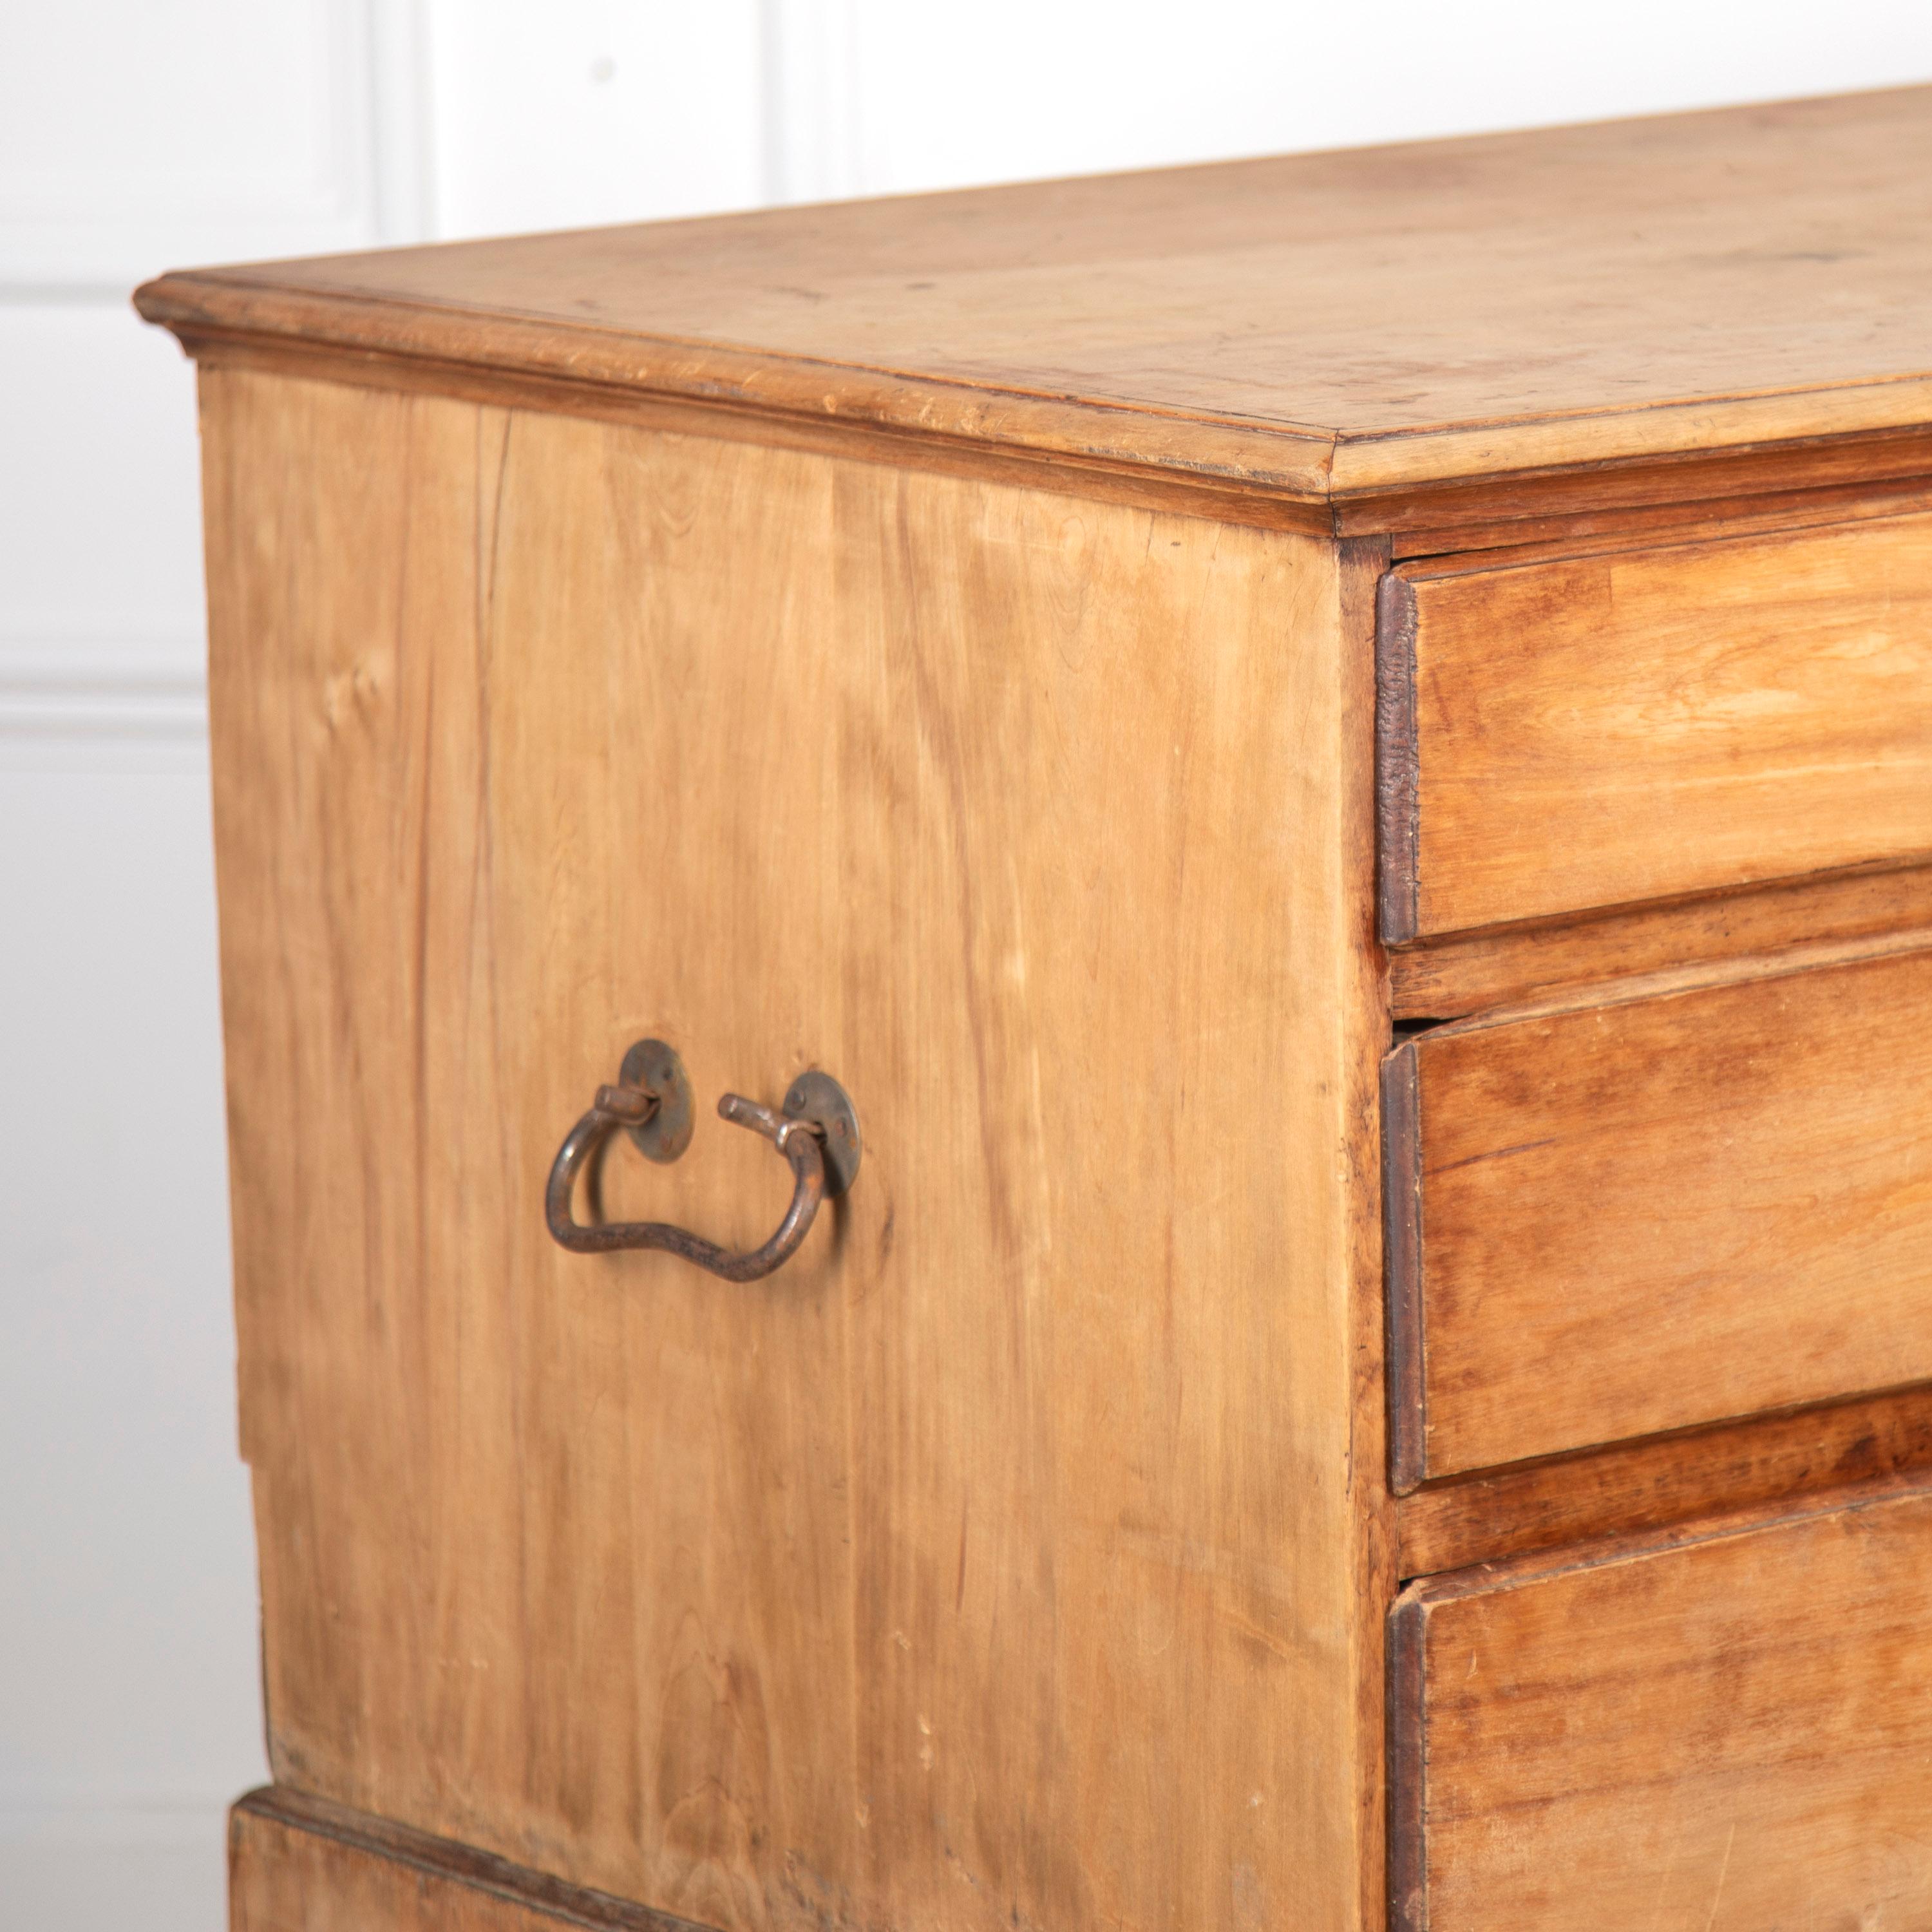 Early 19th century Swedish box on chest. 

This chest of drawers is in very good condition, retaining its original handles to both sides, and elegant bracket feet. The whole has been taken back to its original form and graining.

Featuring